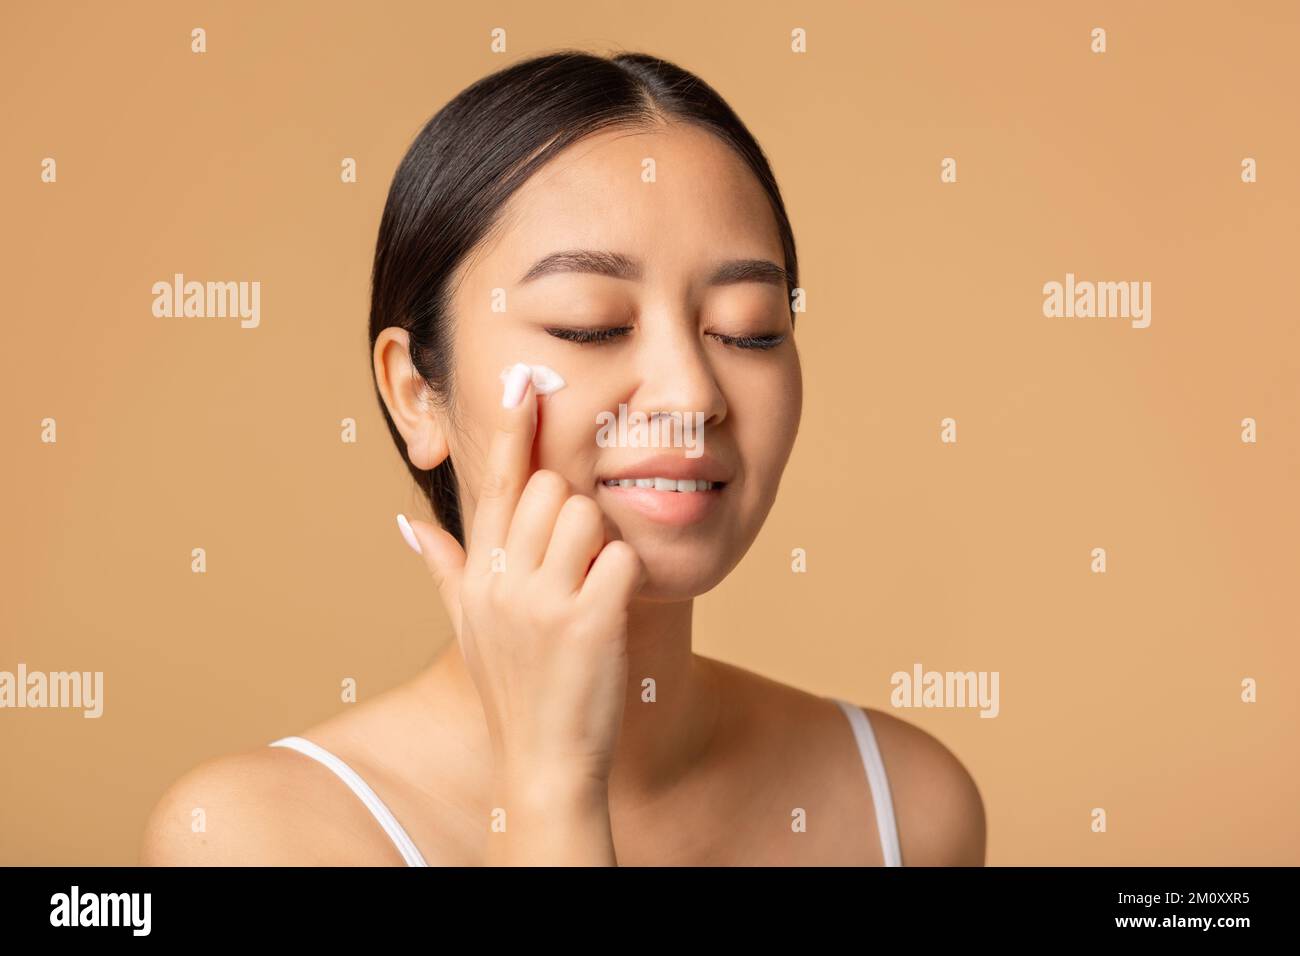 woman applying a anti age or moisturizer face cream on her face, smiling sweetly standing on beige background Stock Photo